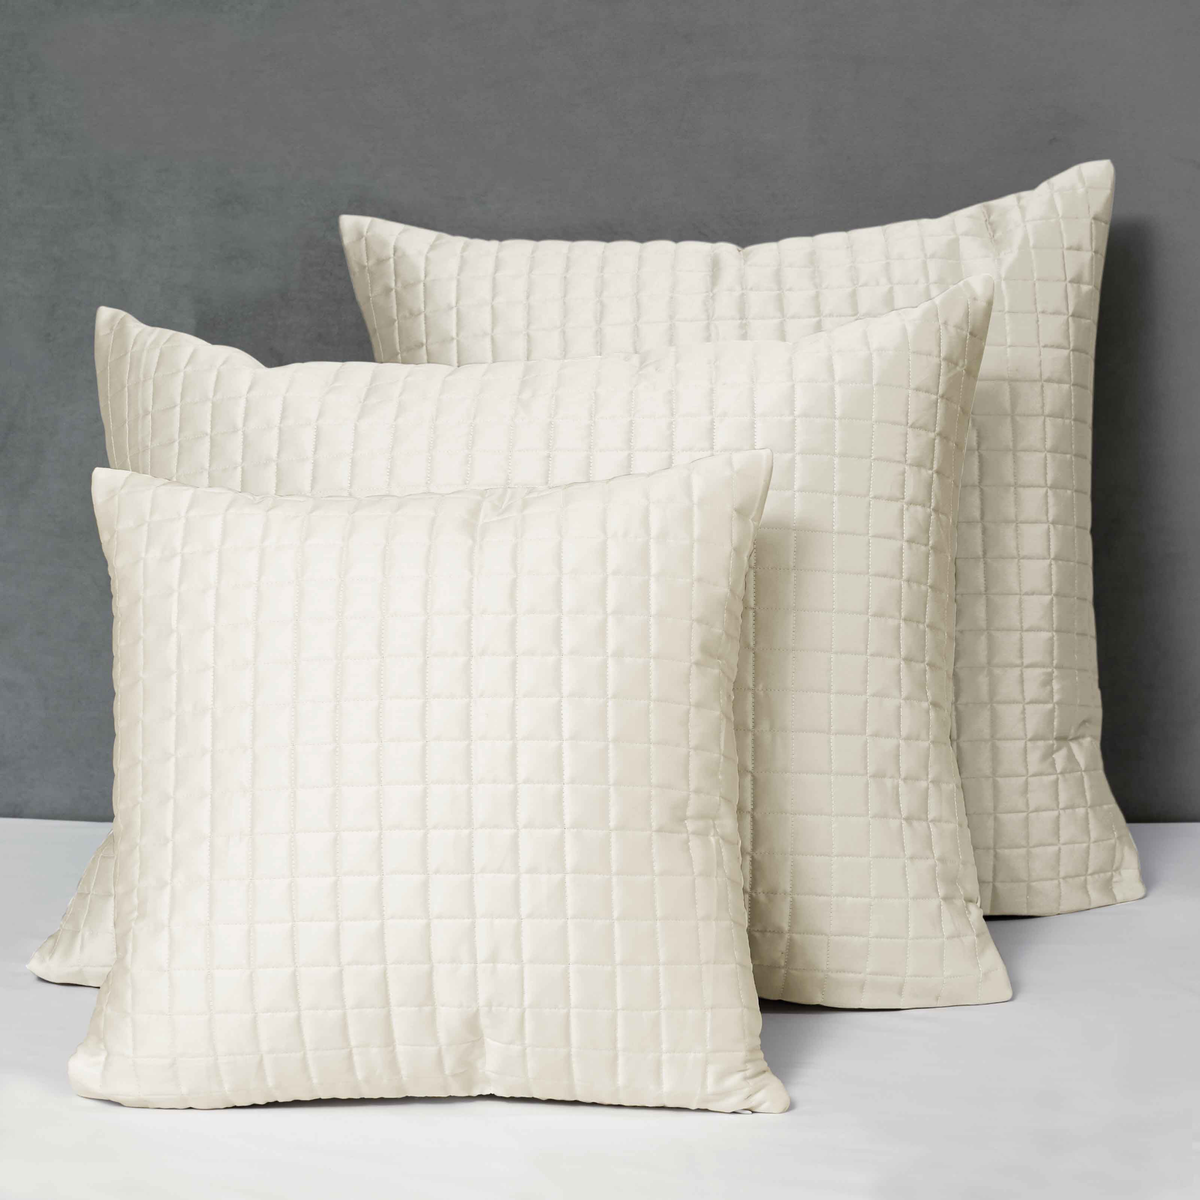 Different Sizes of Quilted Shams of Signoria Masaccio Bedding in Ivory Color